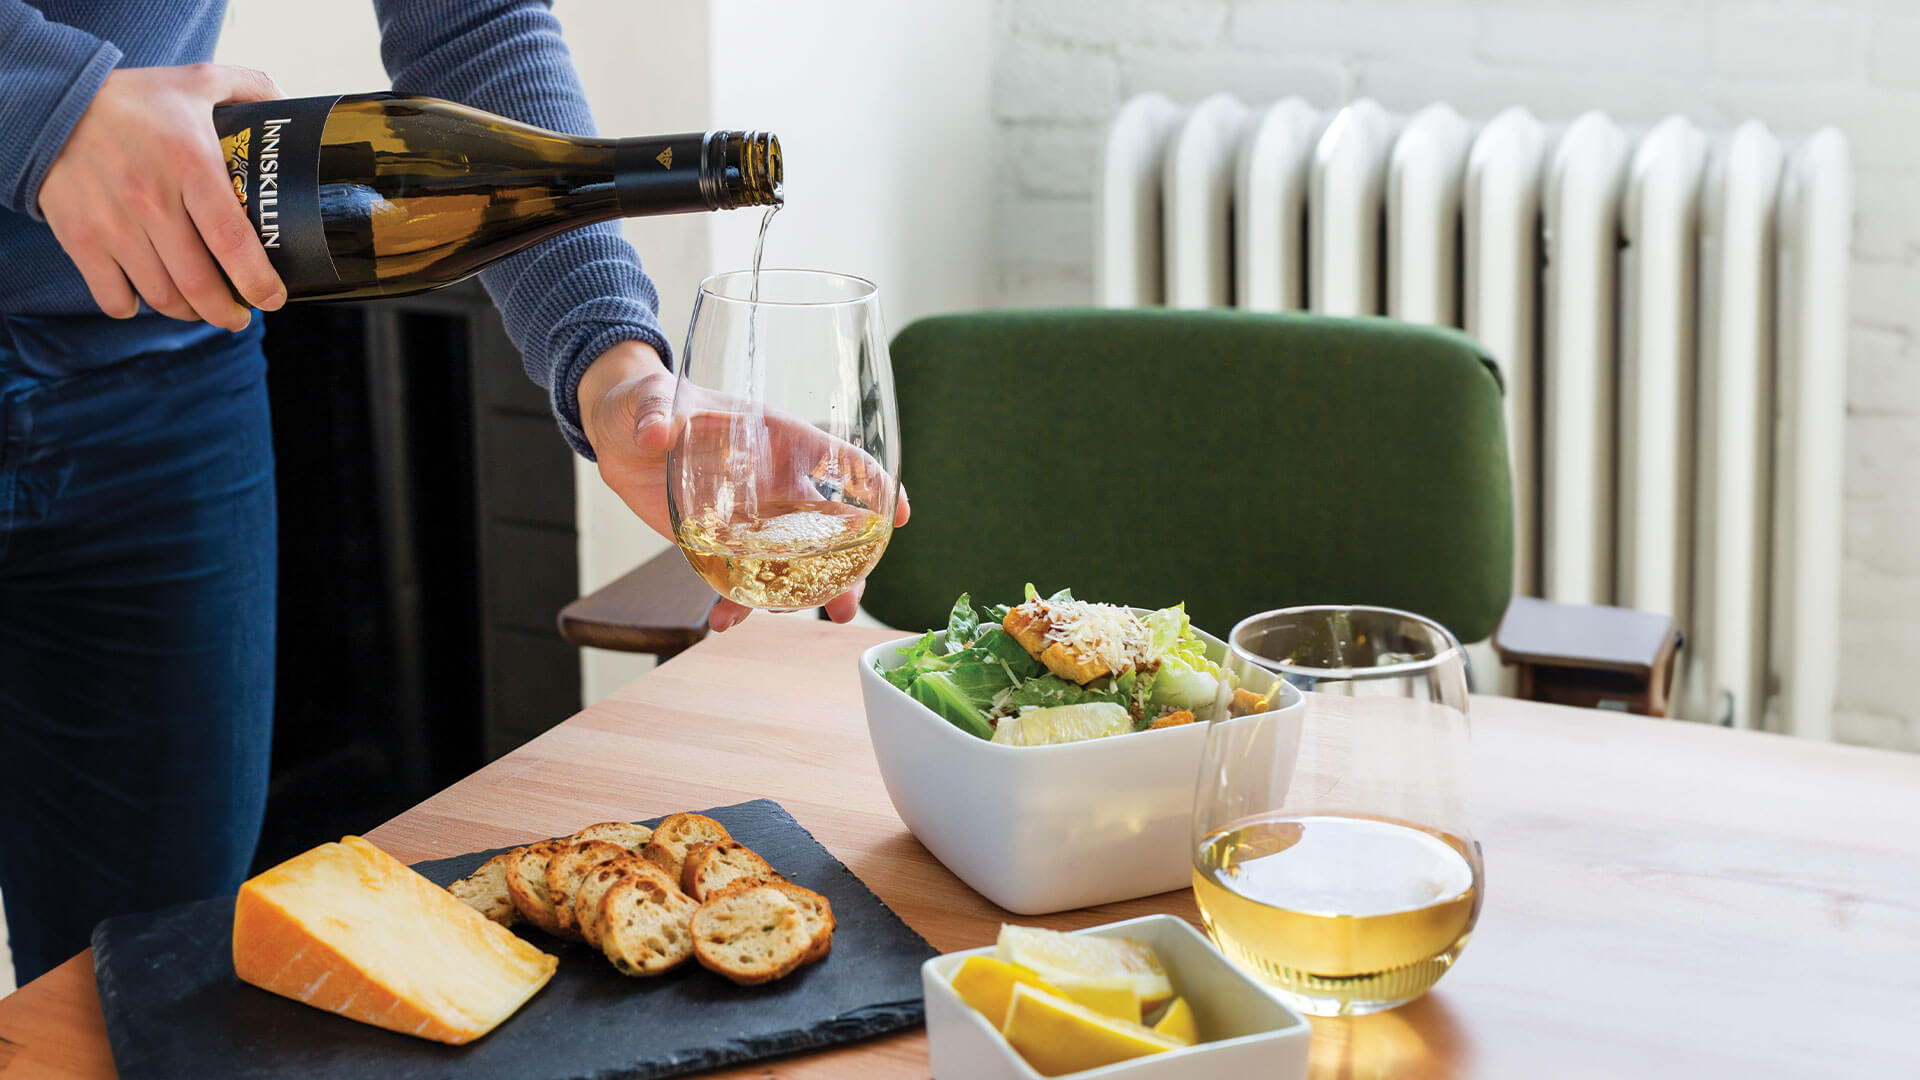 Pouring of Inniskillin White Wine paired with crostini platter and Ceasar salad.